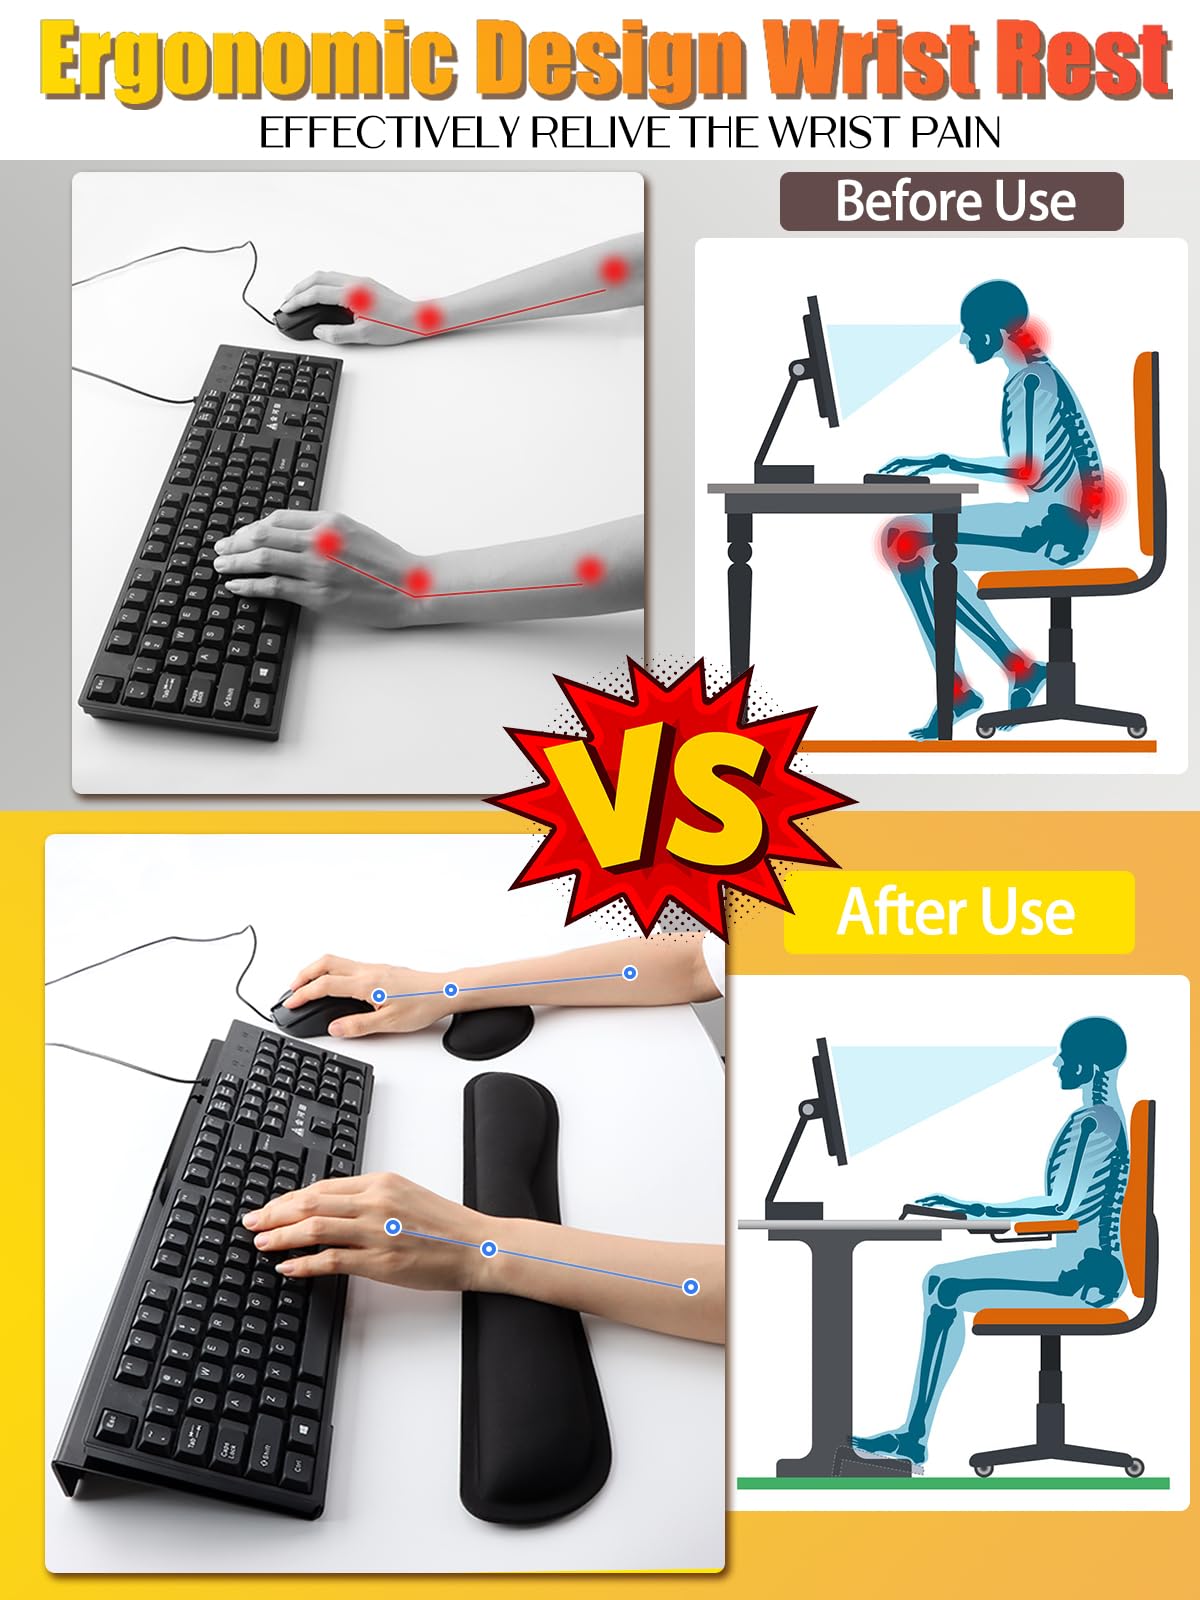 Kalolary 3Pcs Black Acrylic Tilted Computer Keyboard Holder with Mouse & Keyboard Wrist Rest Pad, Computer Keyboard Stand Set for Easy Ergonomic Typing for Office Desk, Home, School